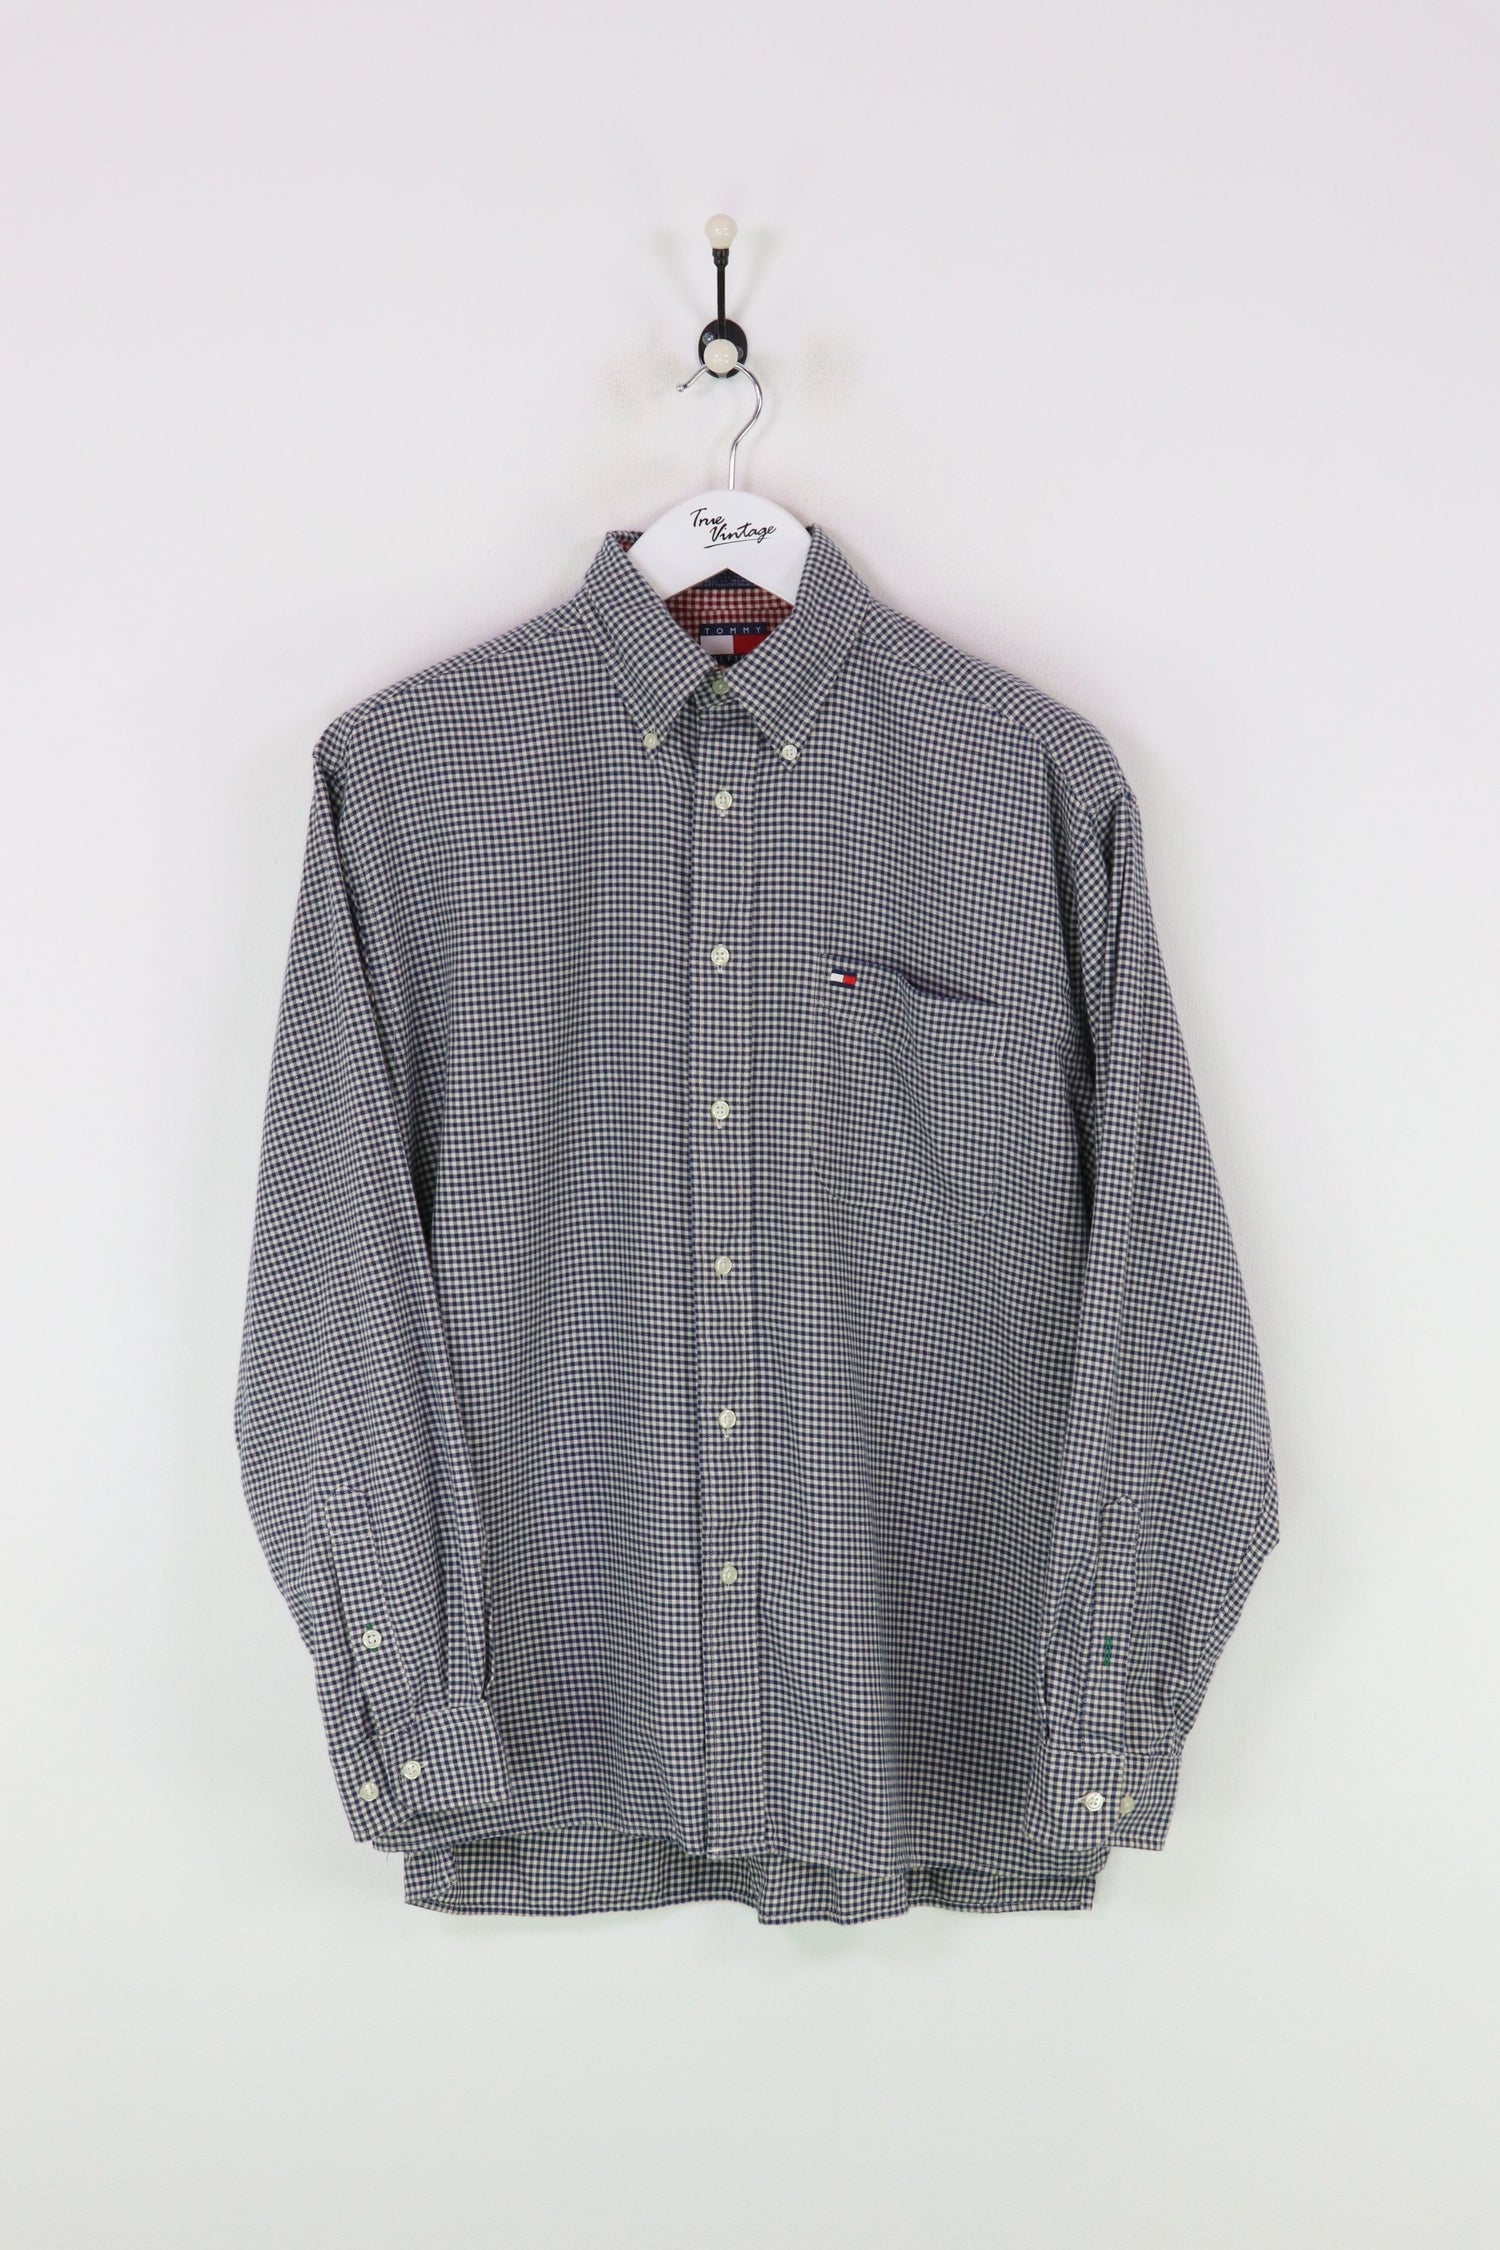 Tommy Hilfiger Shirt Navy/White Check Large